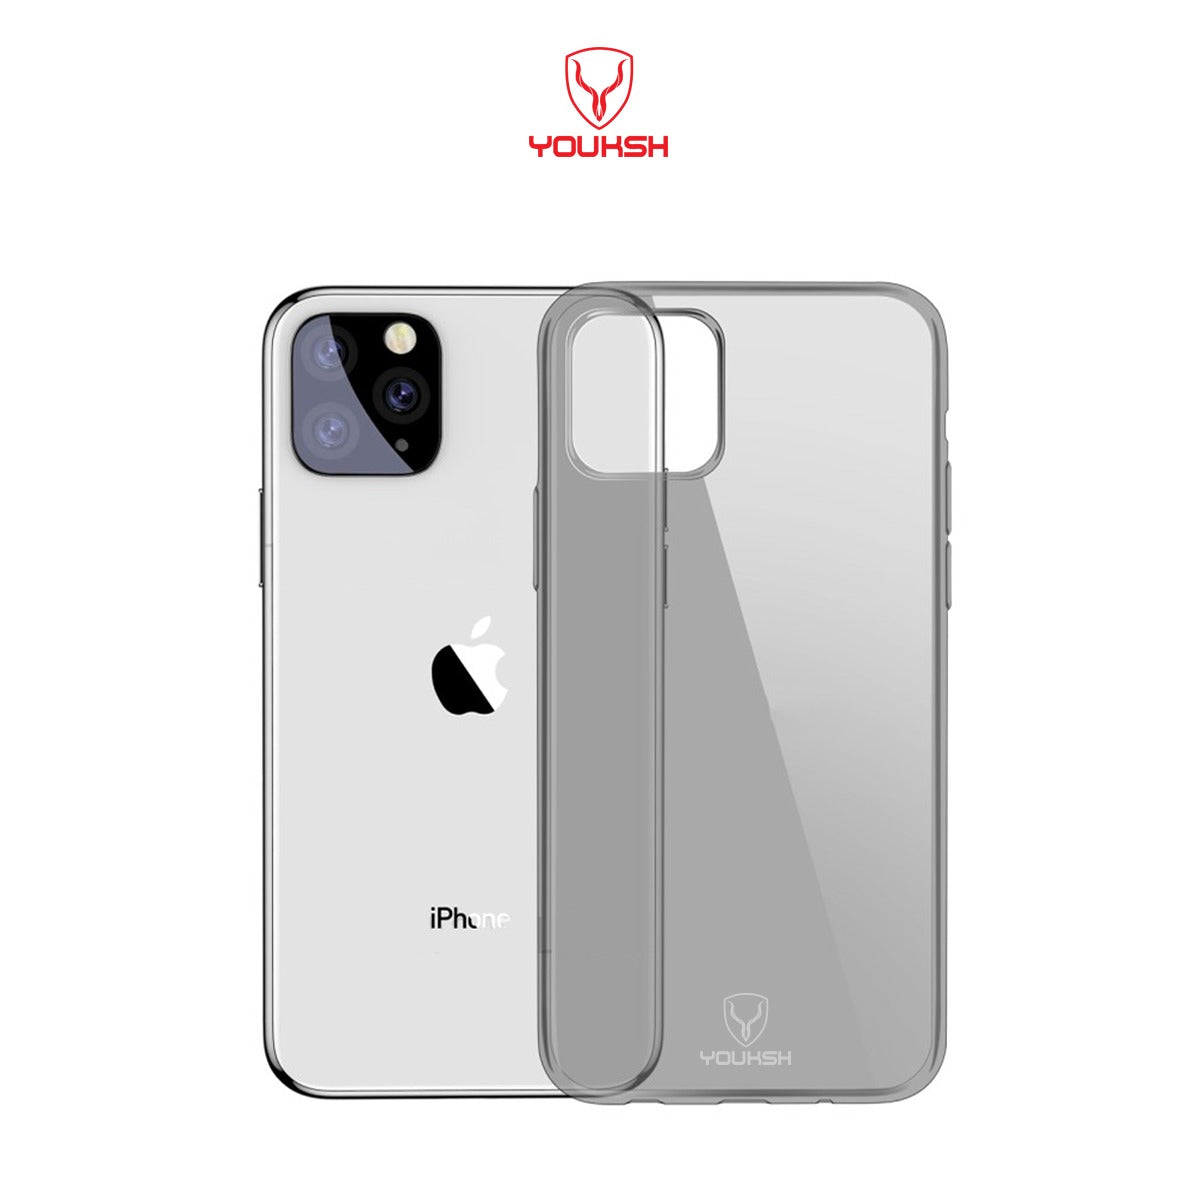 Apple iphone 11 - Soft Shock Proof Jelly Back Cover - Transparent